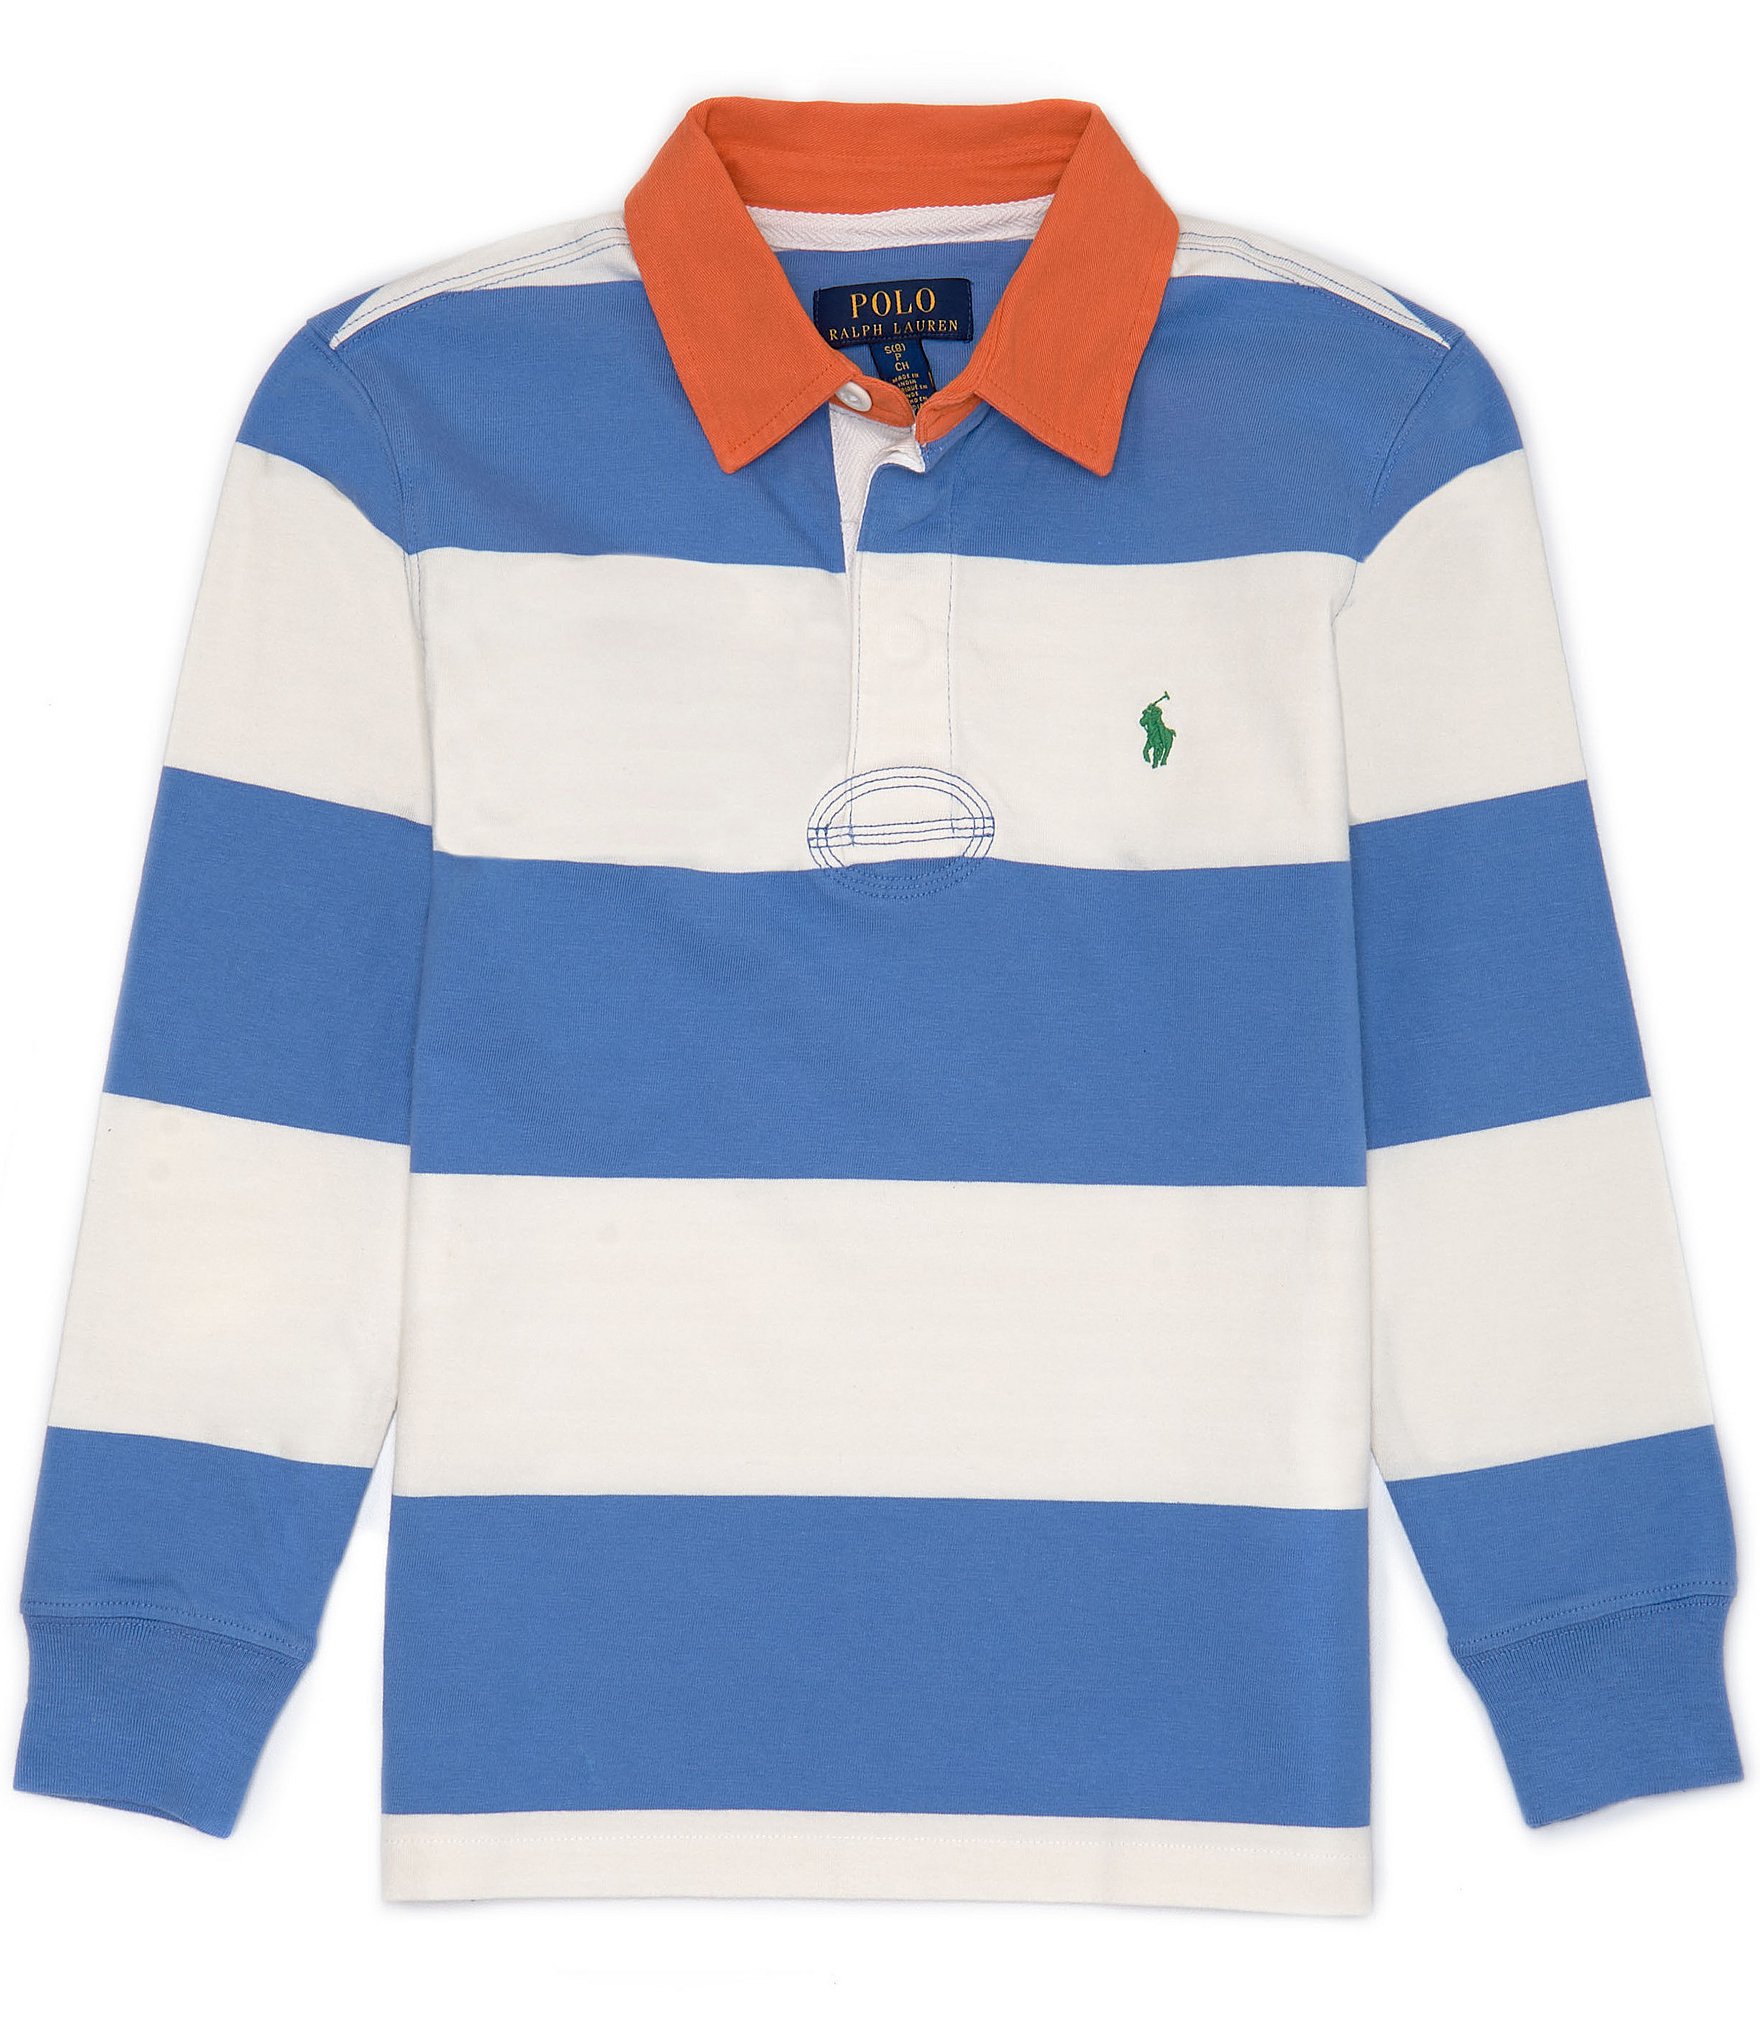 POLO RL / Ralph Lauren / Vintage Rugby / Polo Rugby / Bold Stripes